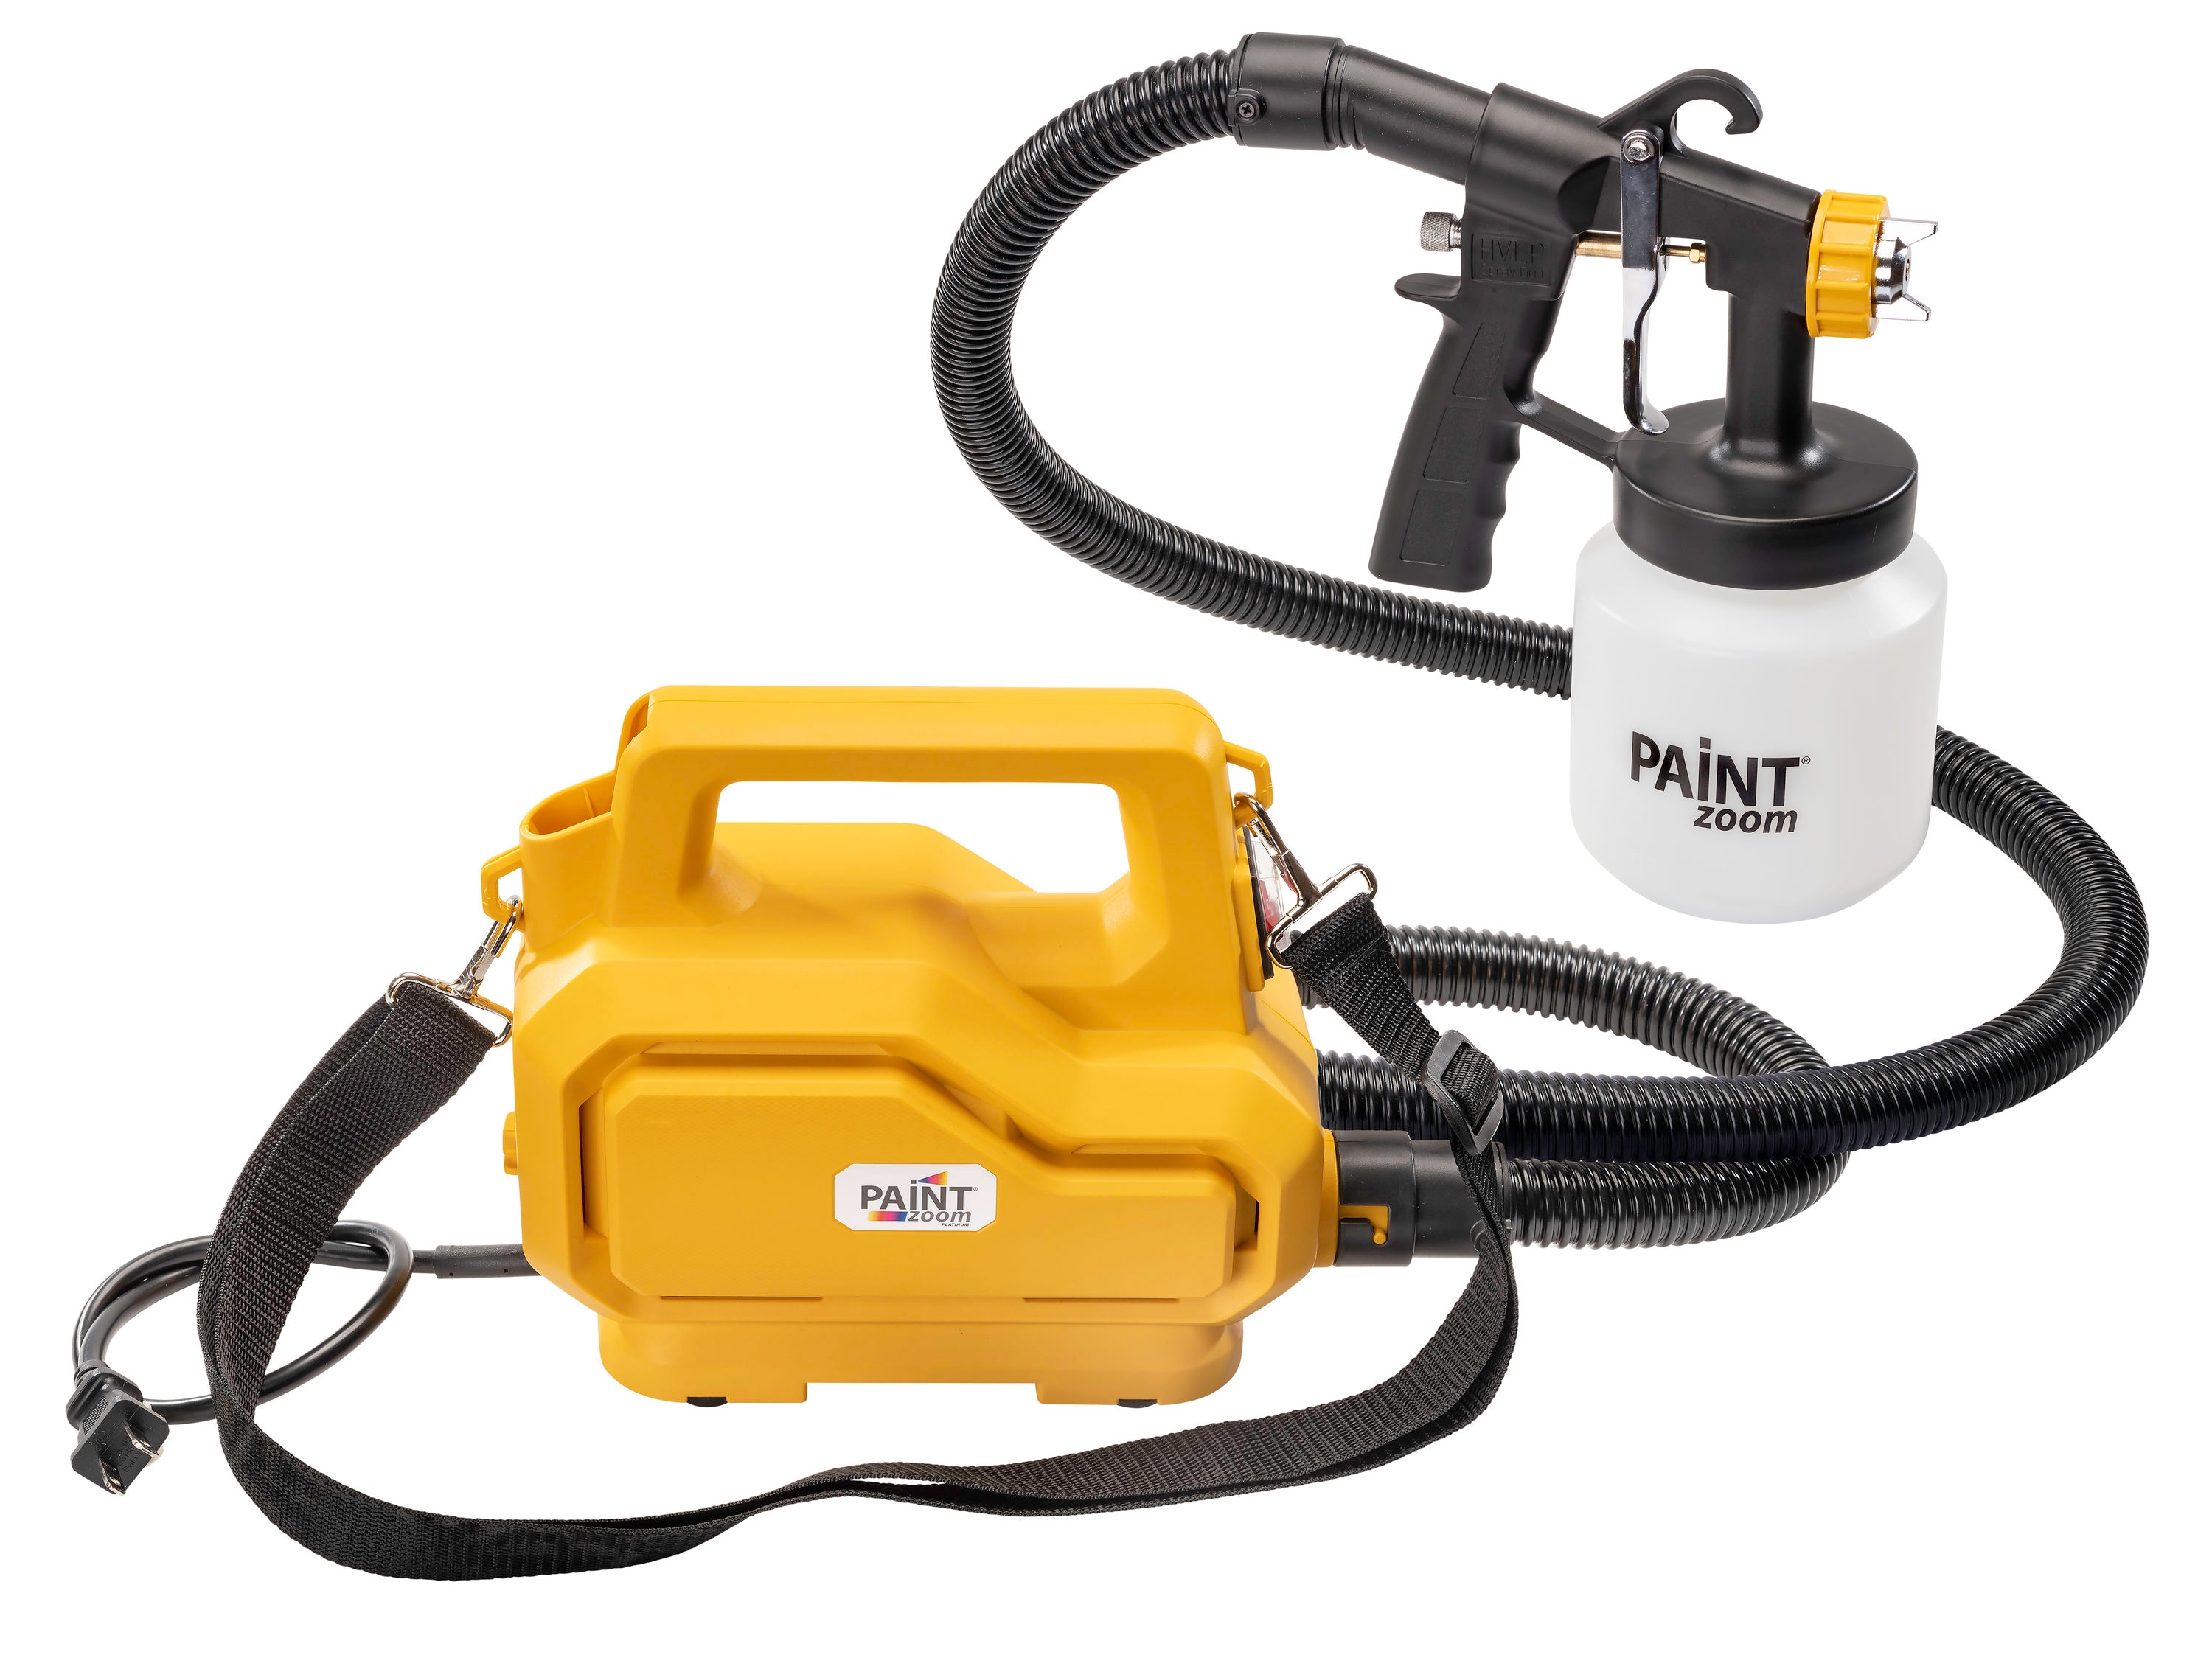 Wagner Home Decor Corded Electric Stationary HVLP Paint Sprayer (Compatible  with Stains) in the HVLP Paint Sprayers department at